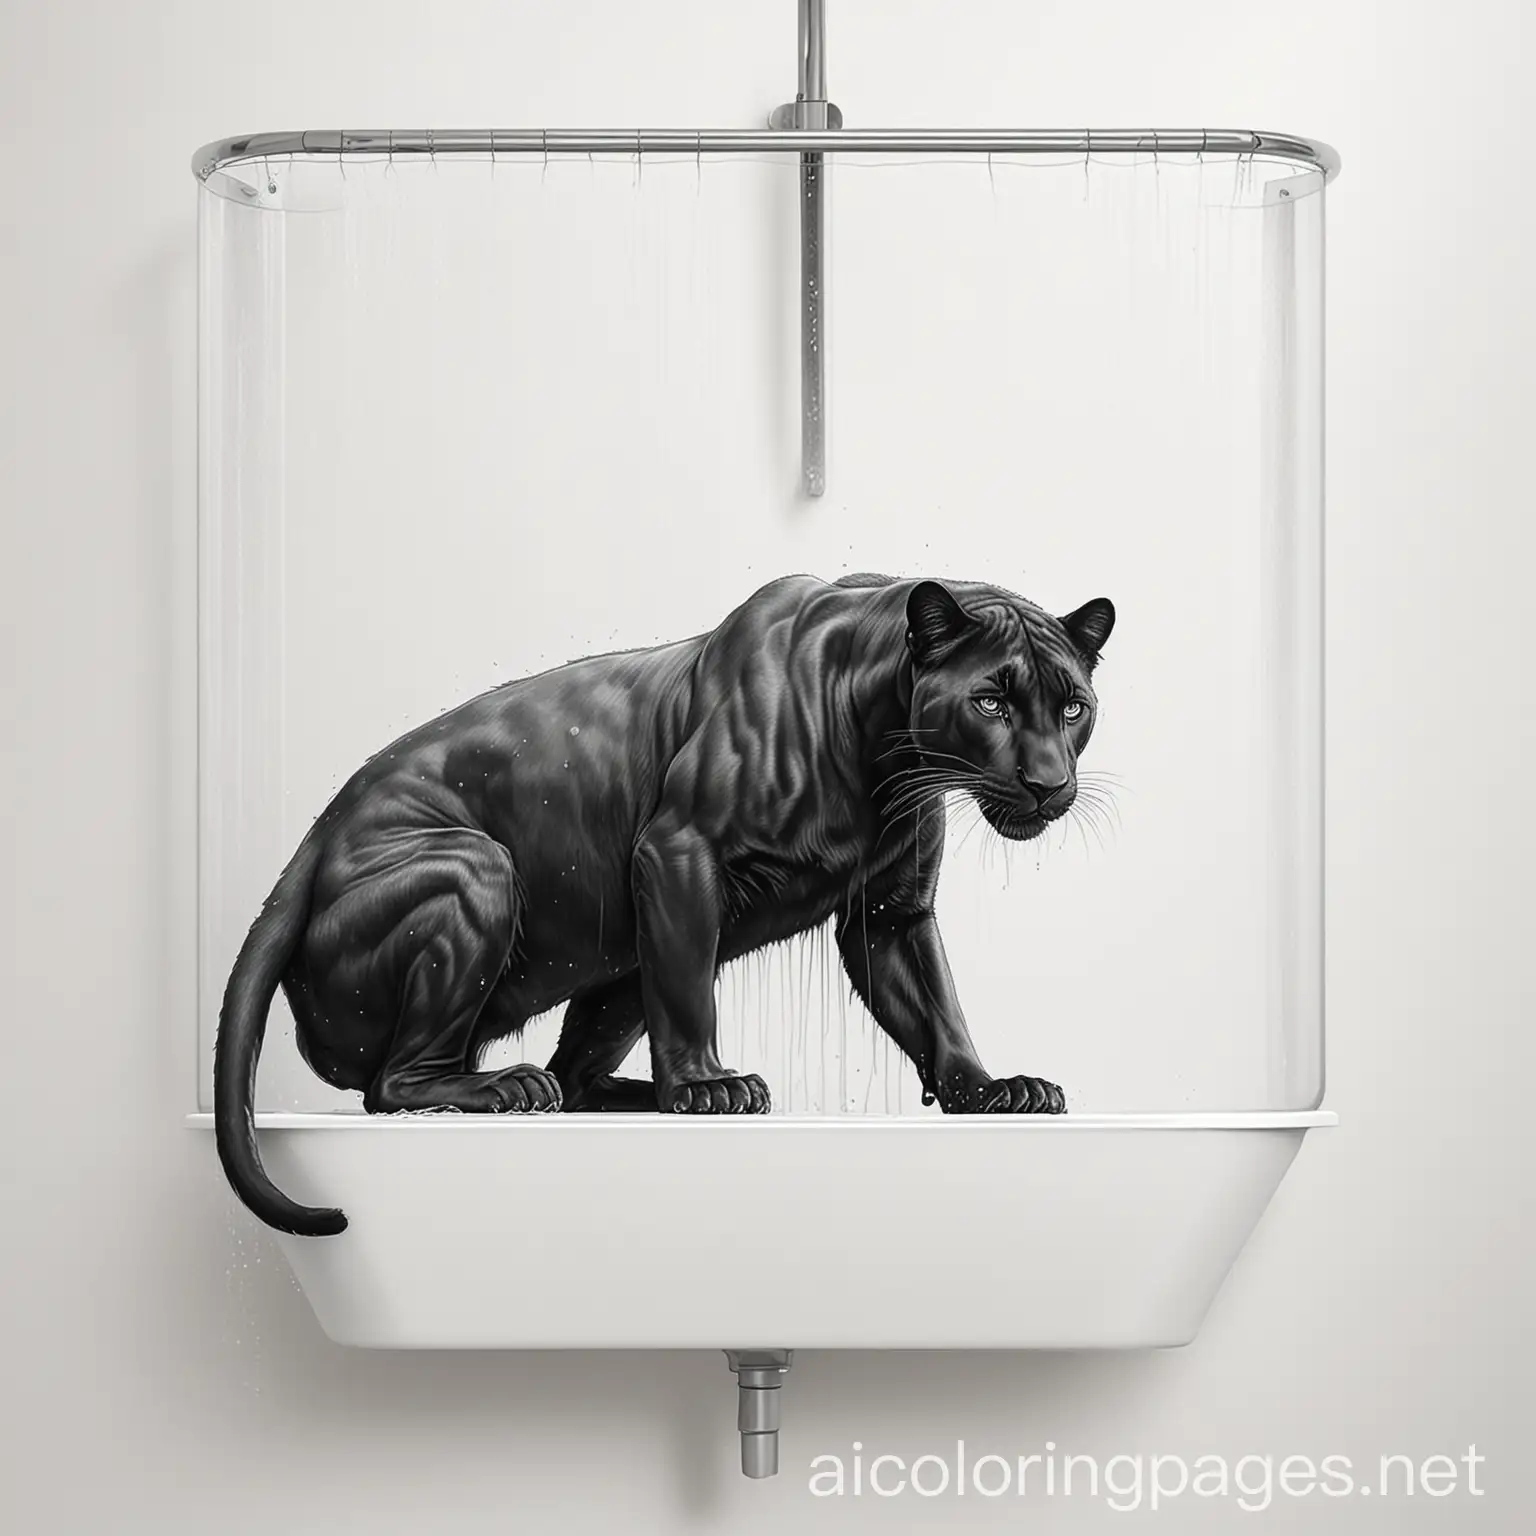 panther at the shower, Coloring Page, black and white, line art, white background, Simplicity, Ample White Space. The background of the coloring page is plain white to make it easy for young children to color within the lines. The outlines of all the subjects are easy to distinguish, making it simple for kids to color without too much difficulty